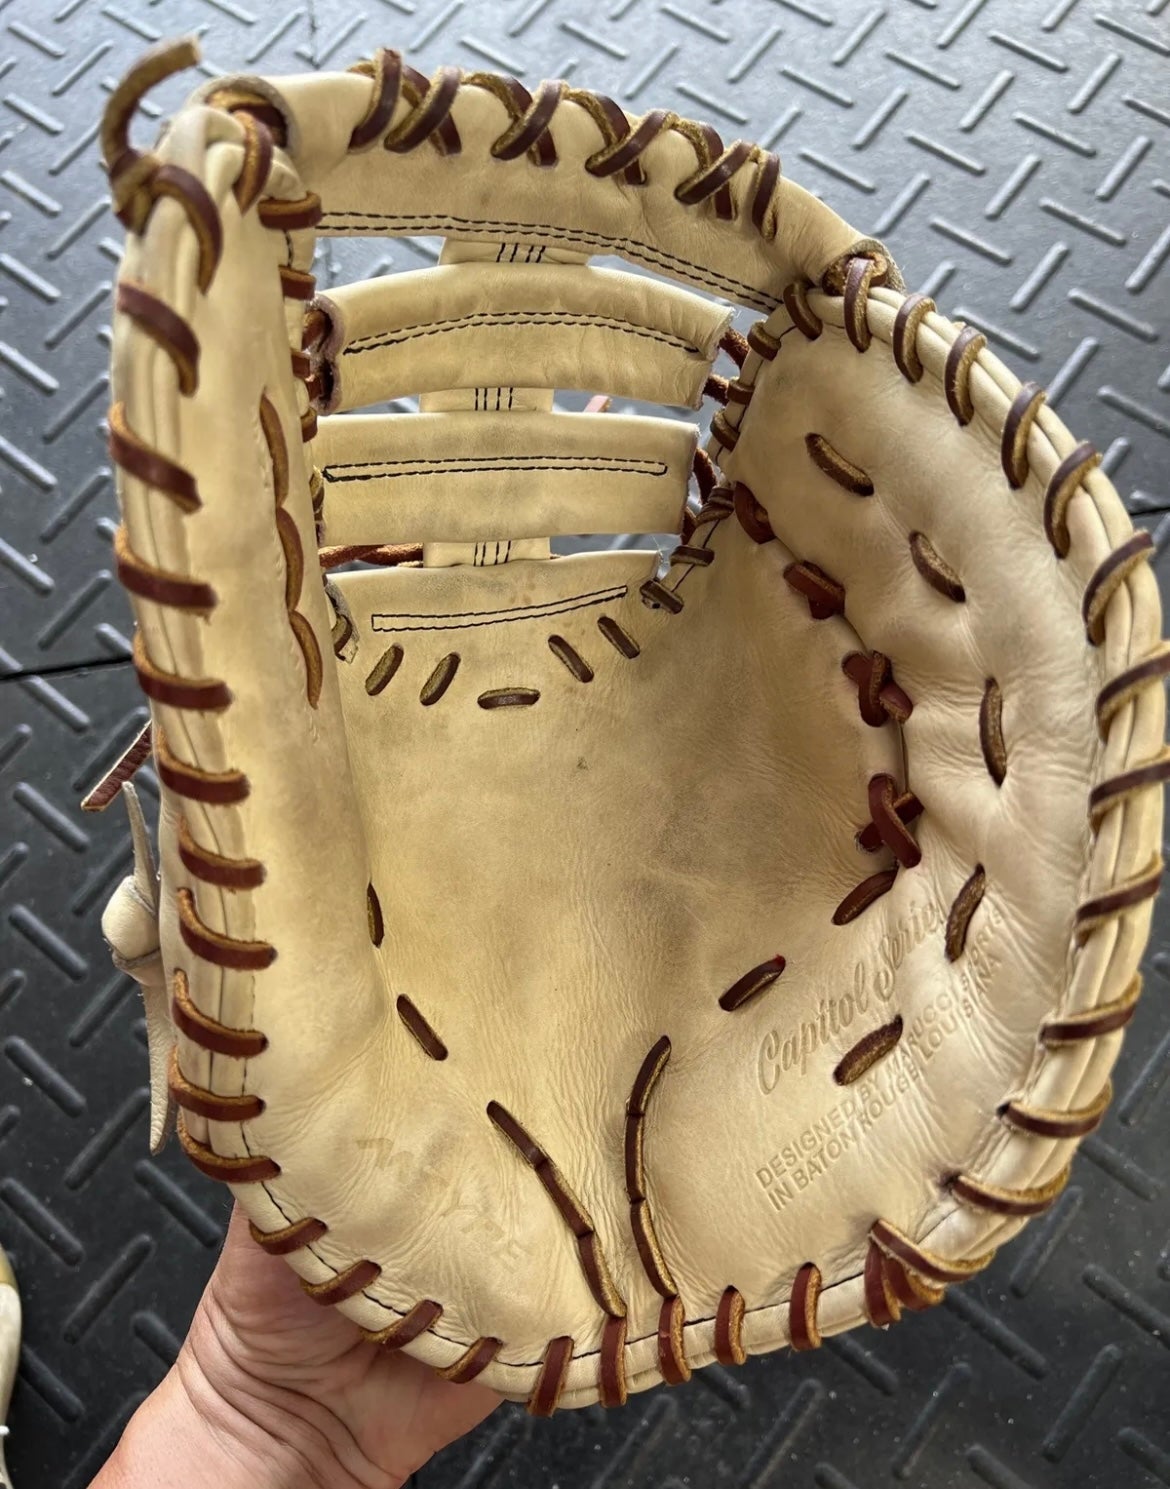 Used 2022 Right Hand Throw 13 Capitol Series Baseball Glove